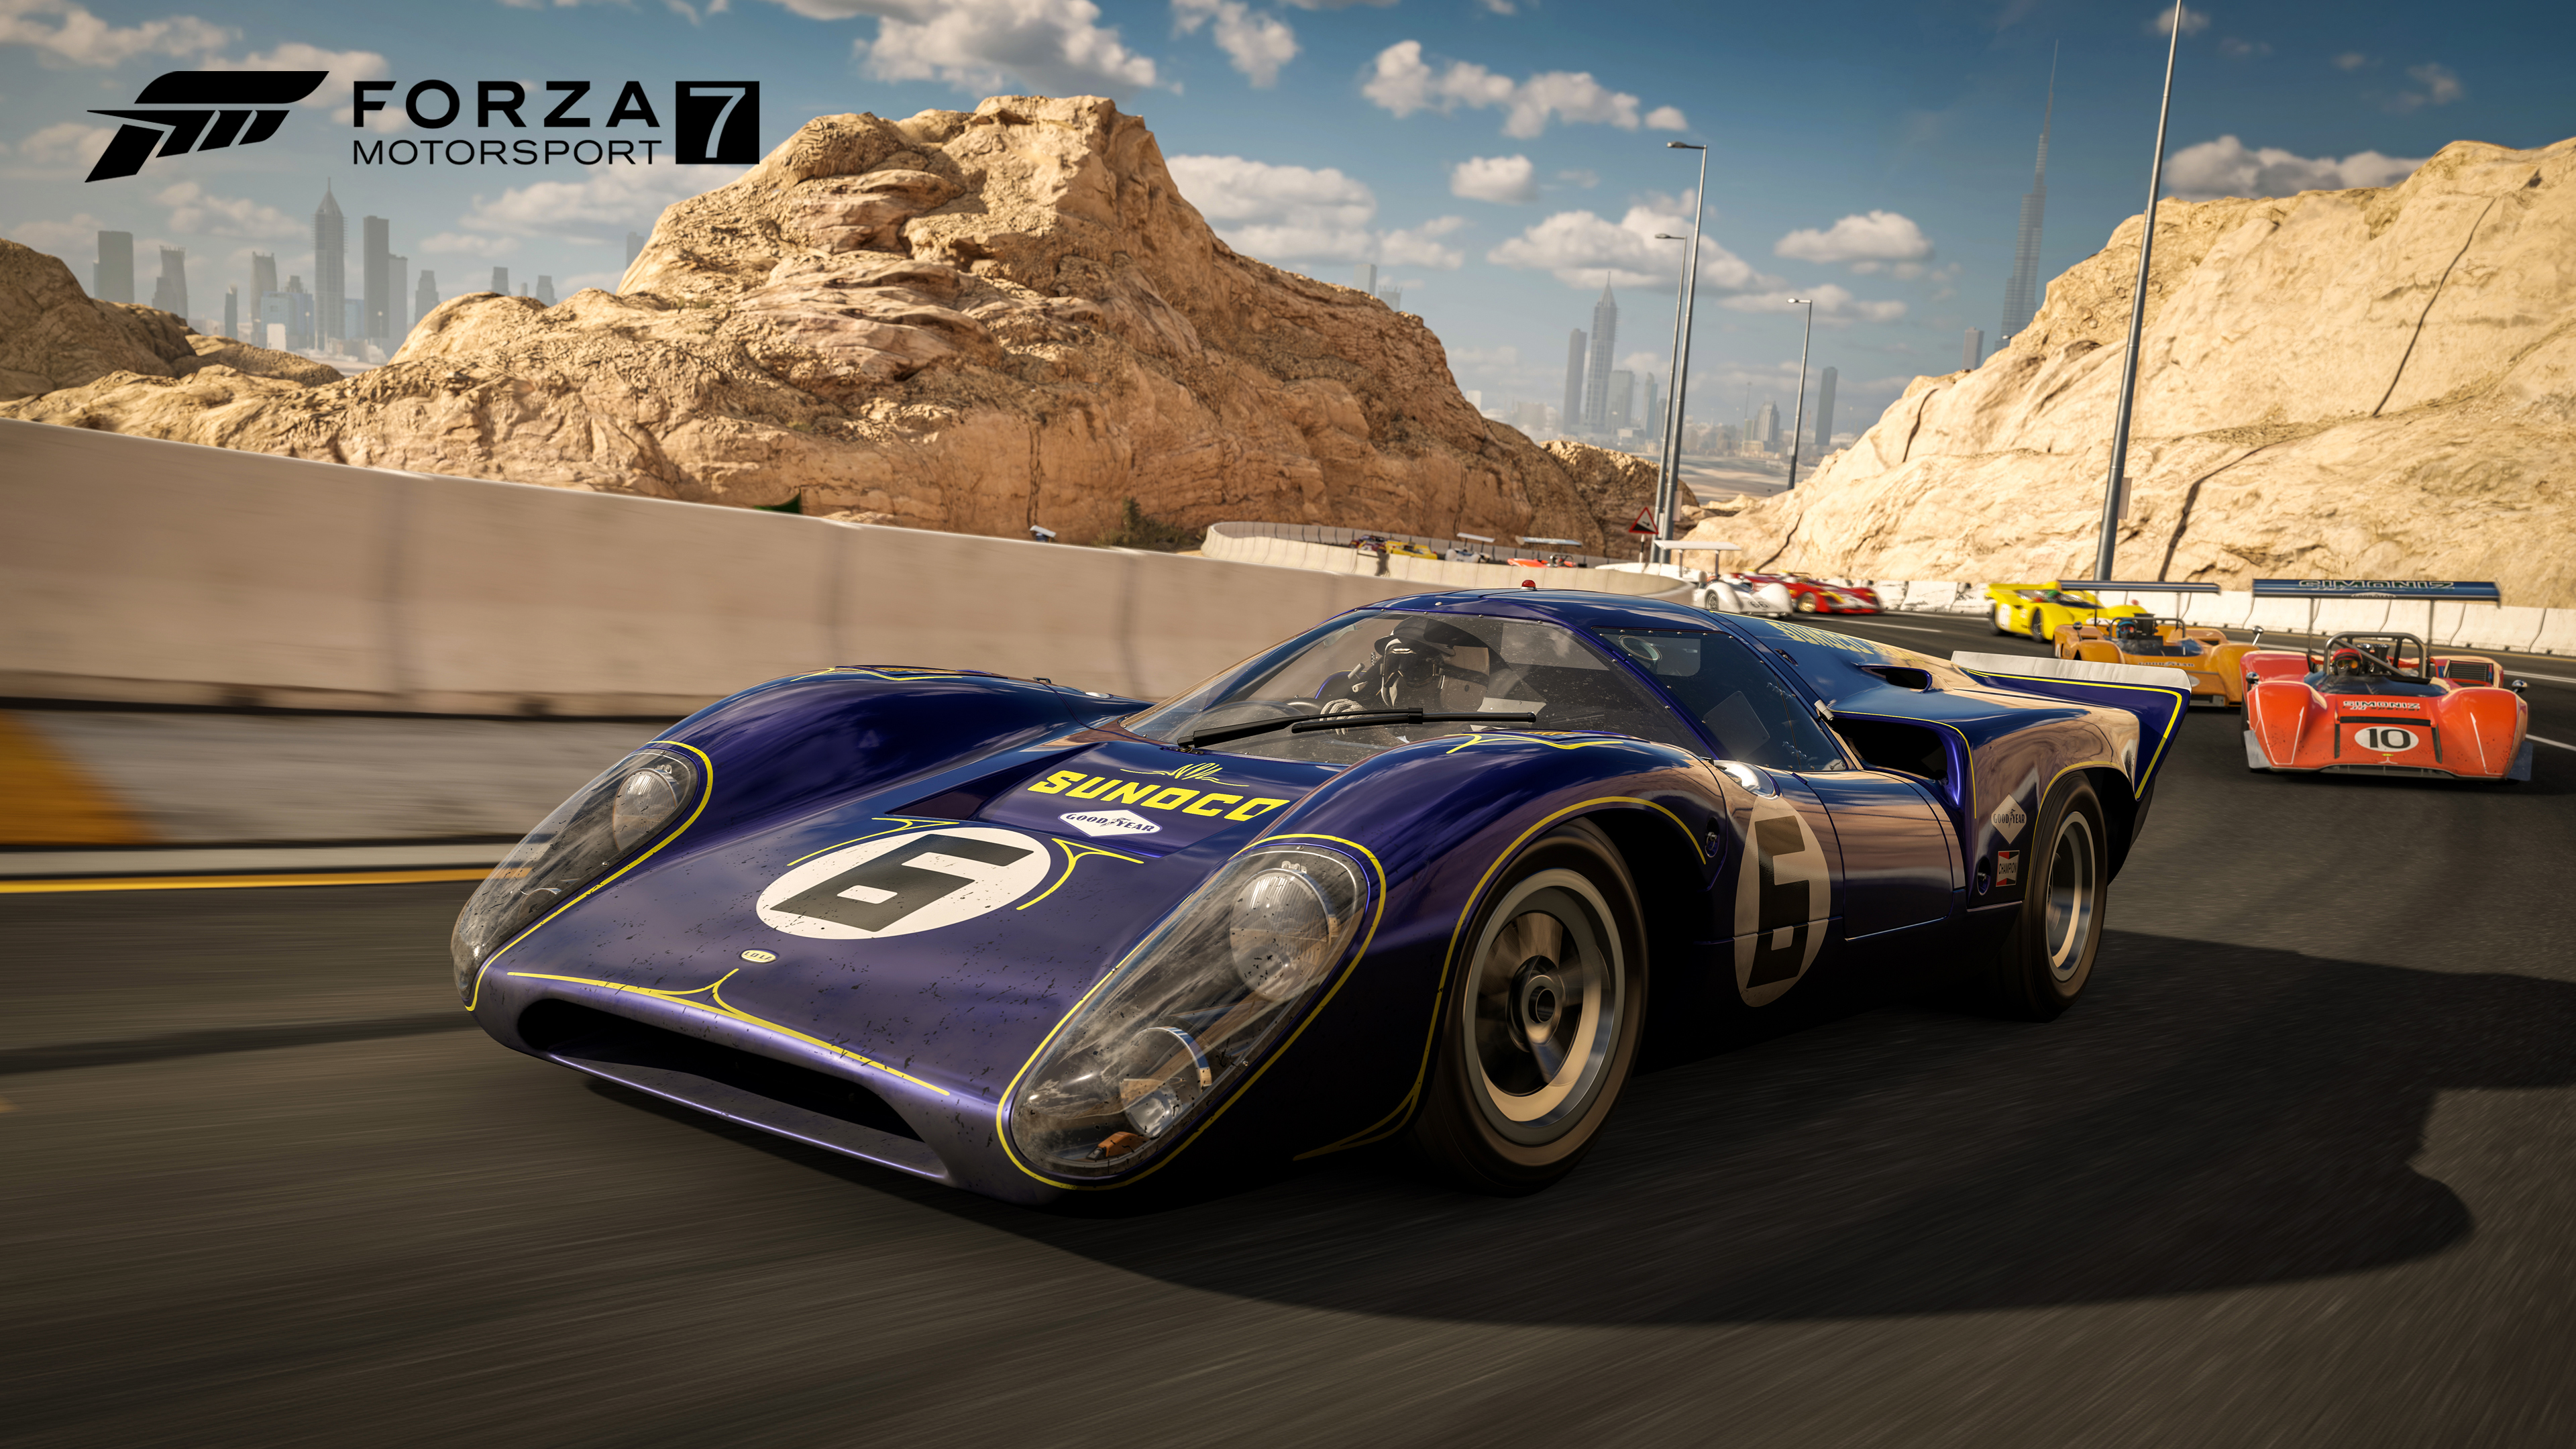 Forza Motorsport 7 will be withdrawn from sale later this year